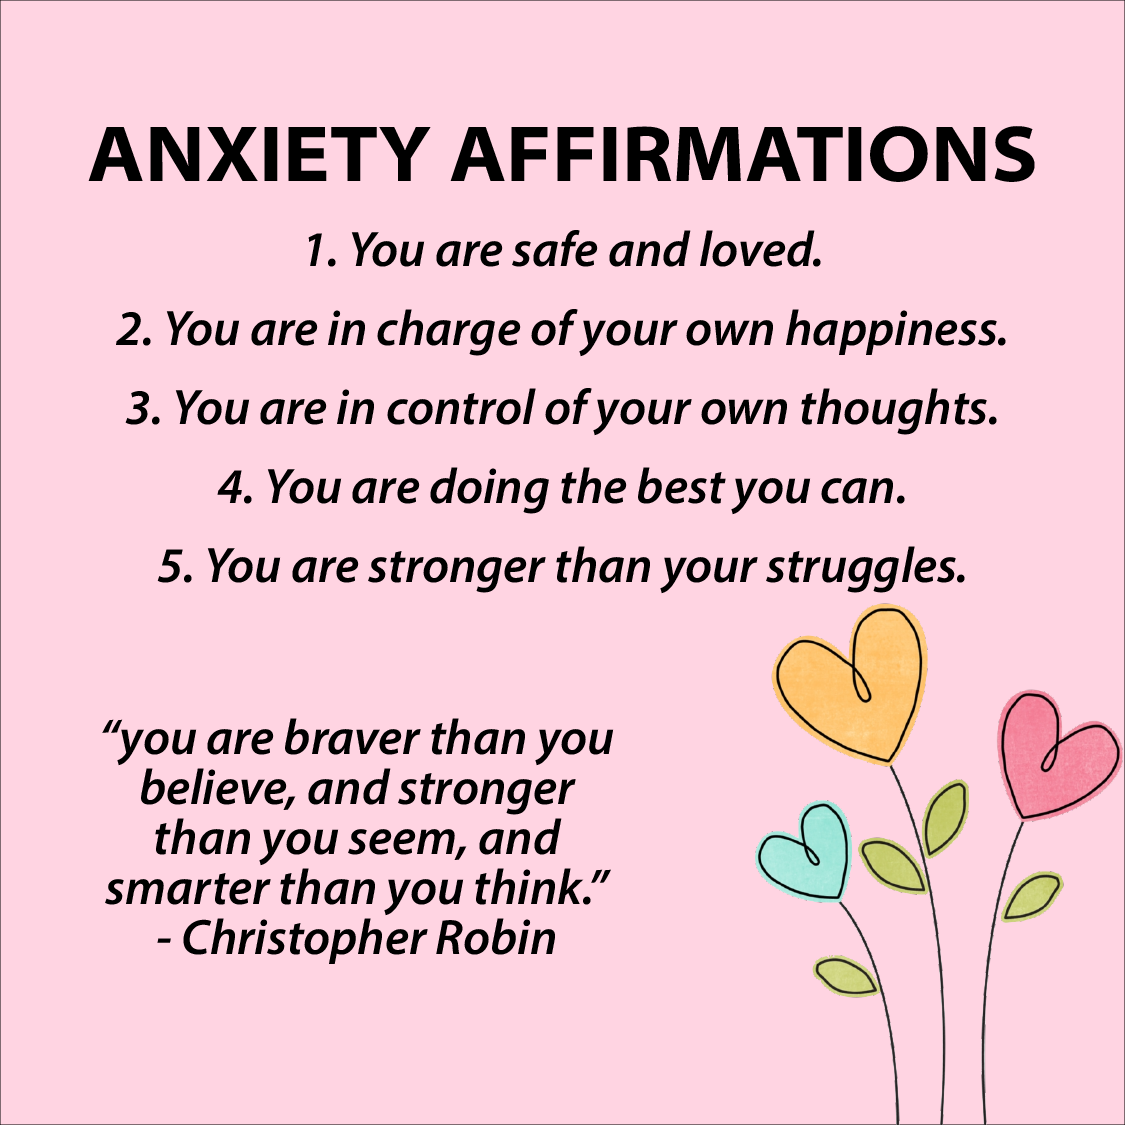 anxiety affirmations-01.png